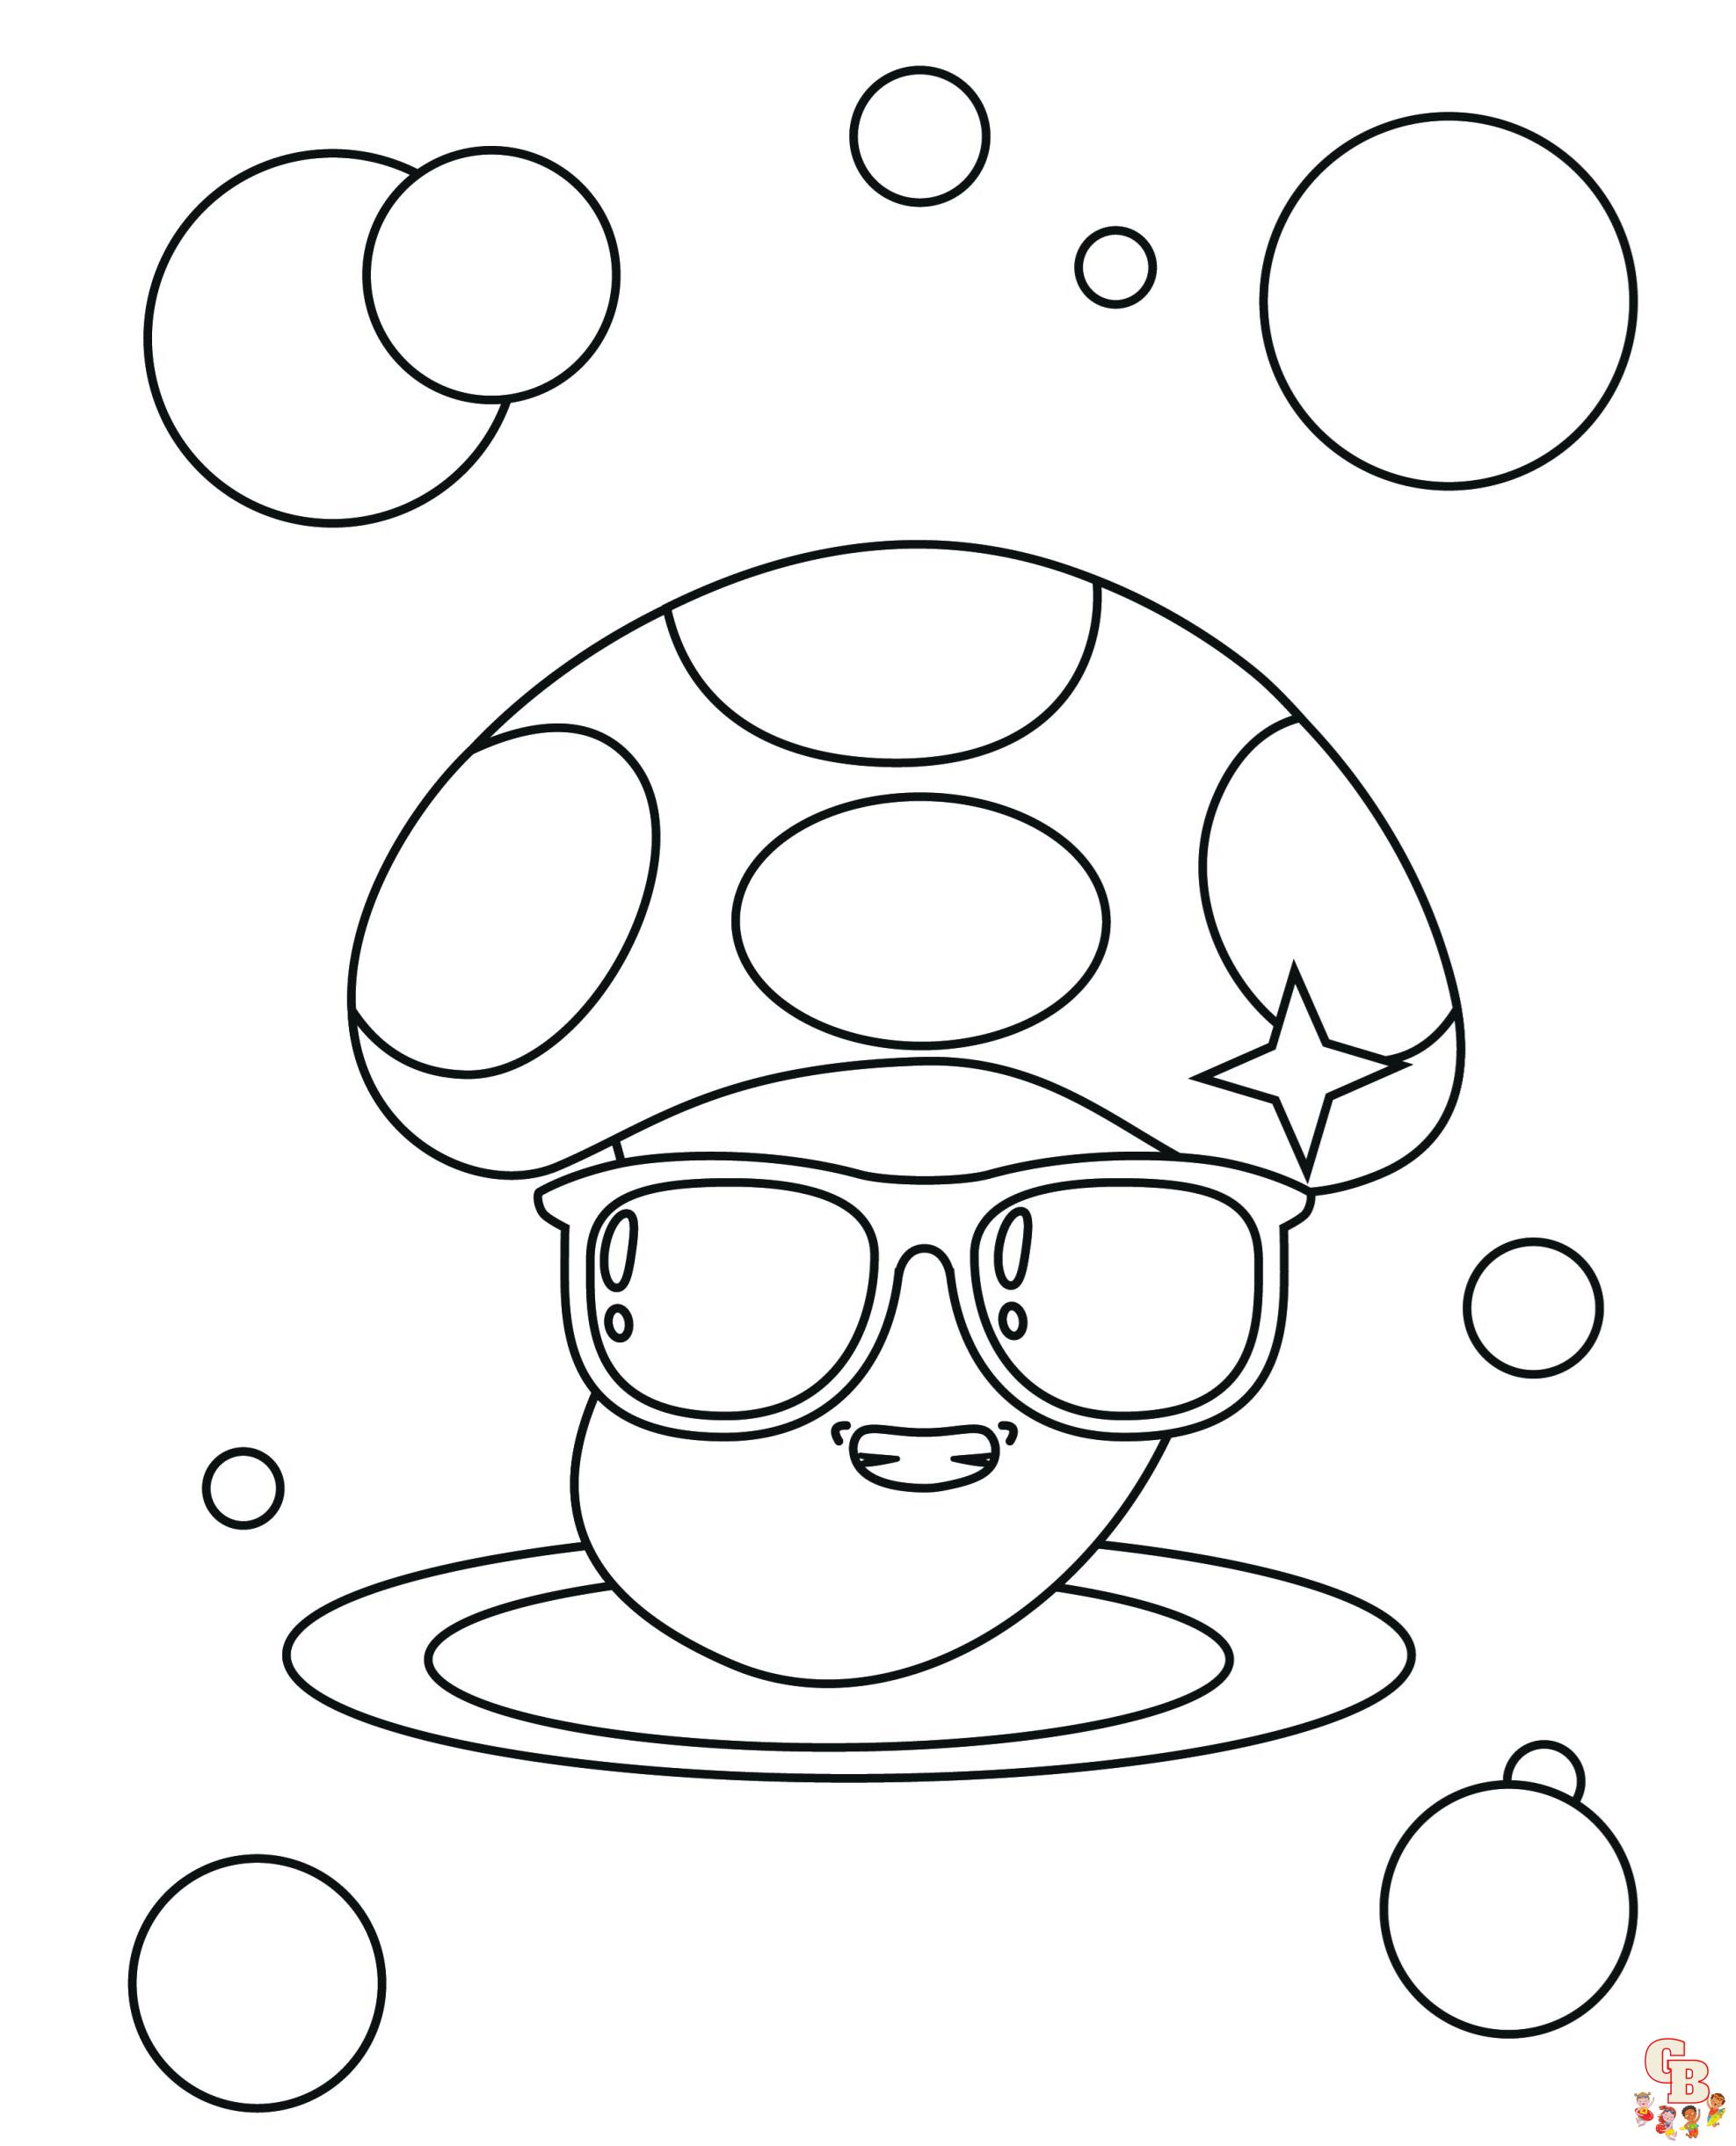 toadette coloring pages to print